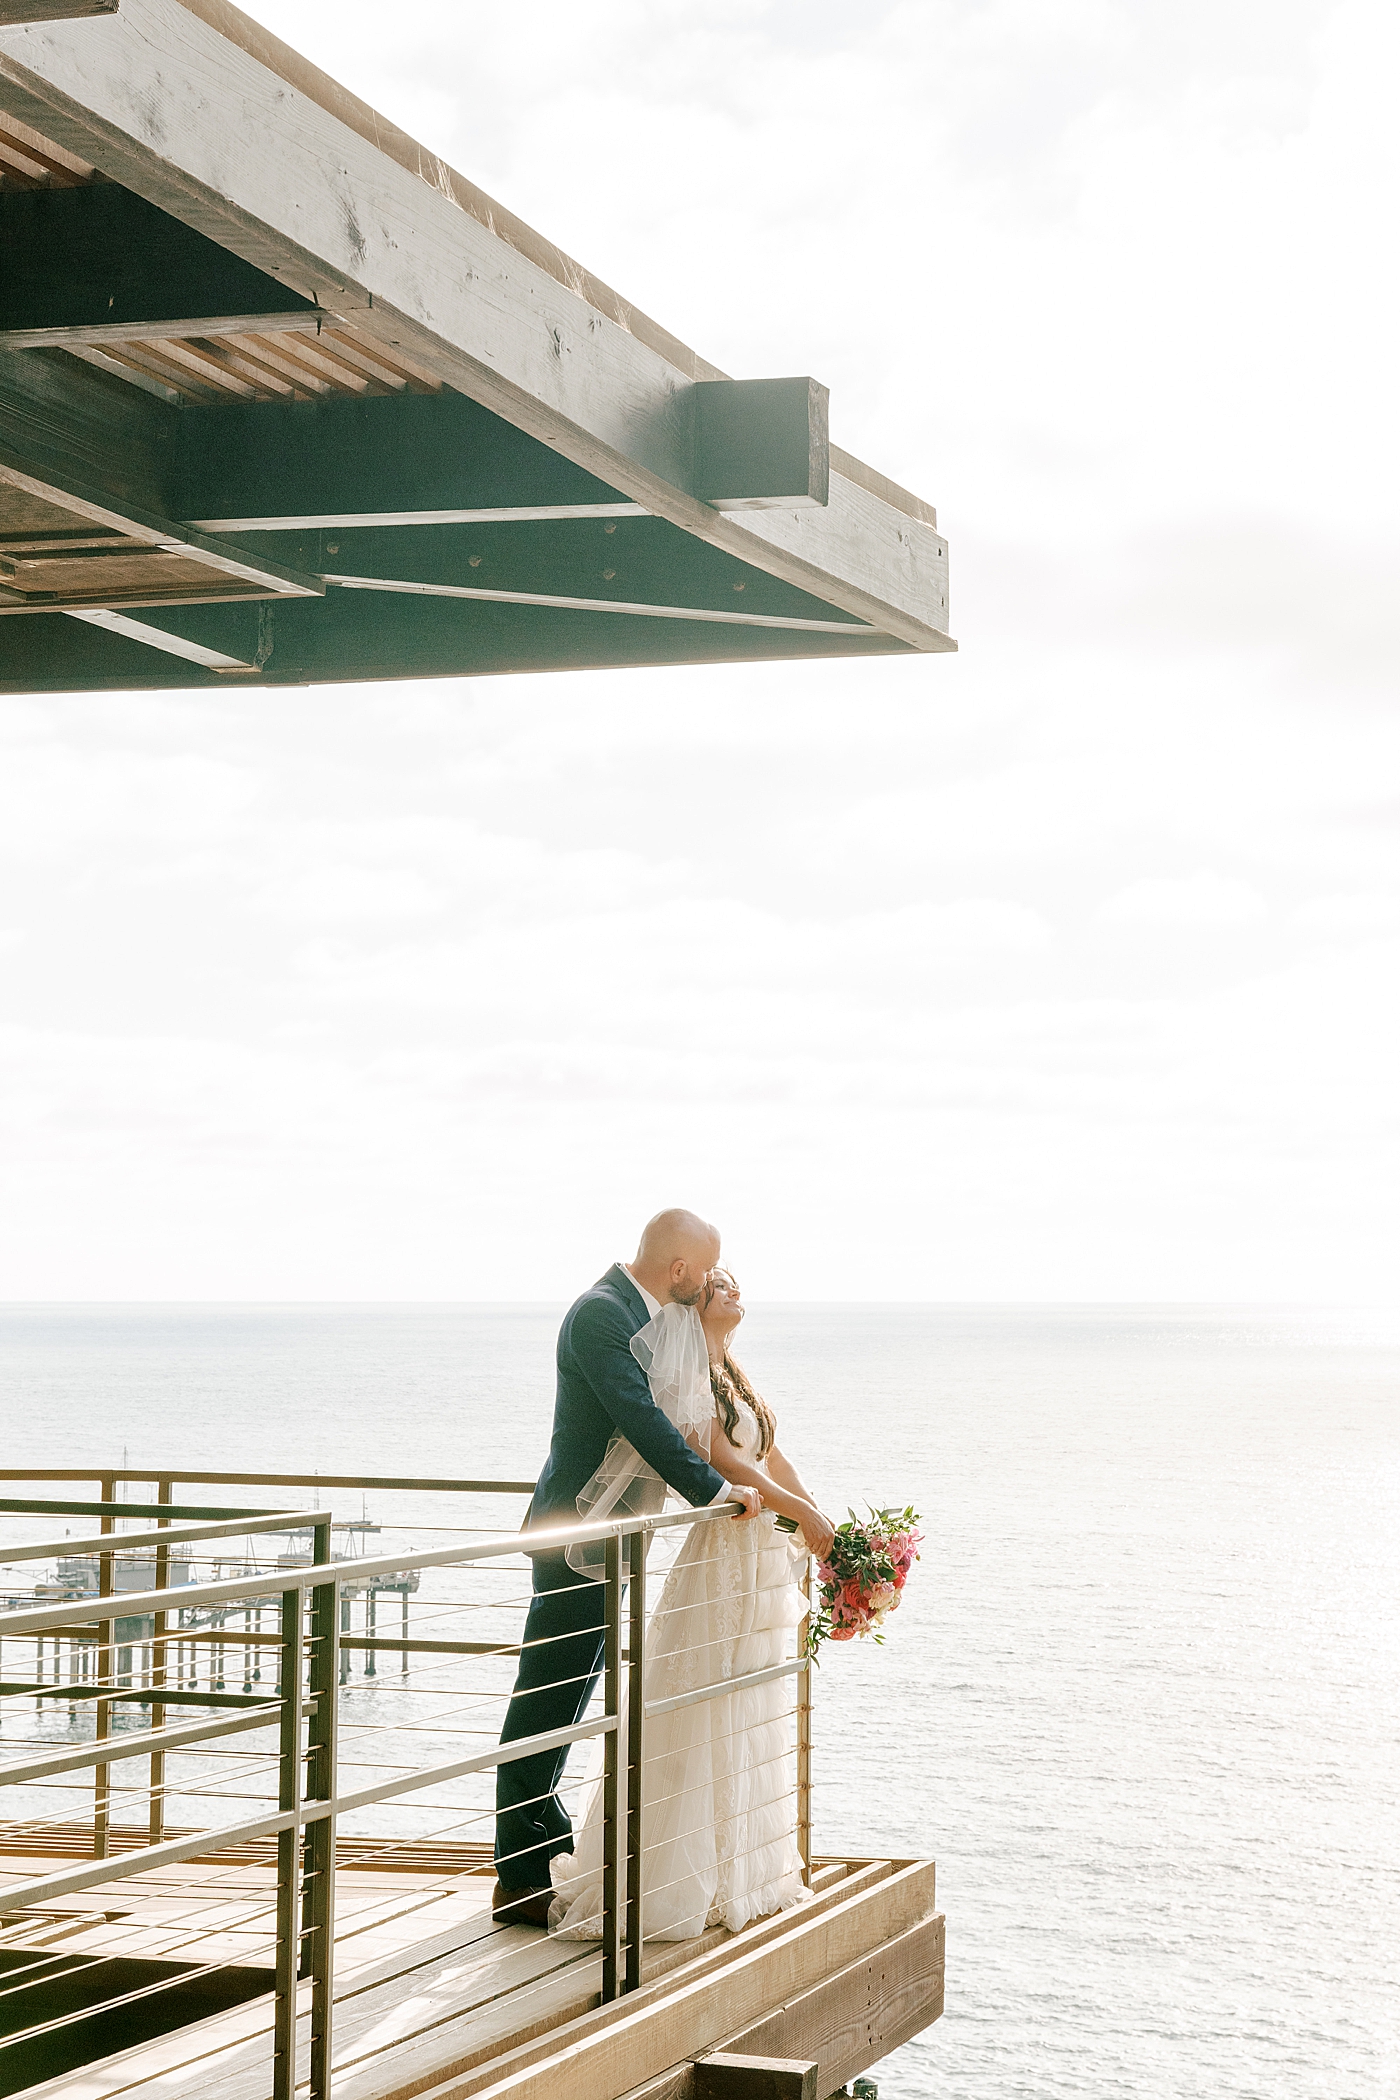 Groom in navy suit and bride in wedding dress standing closely on a wooden balcony that overlooks a tropical, sunny city | Image by Hope Helmuth Photography